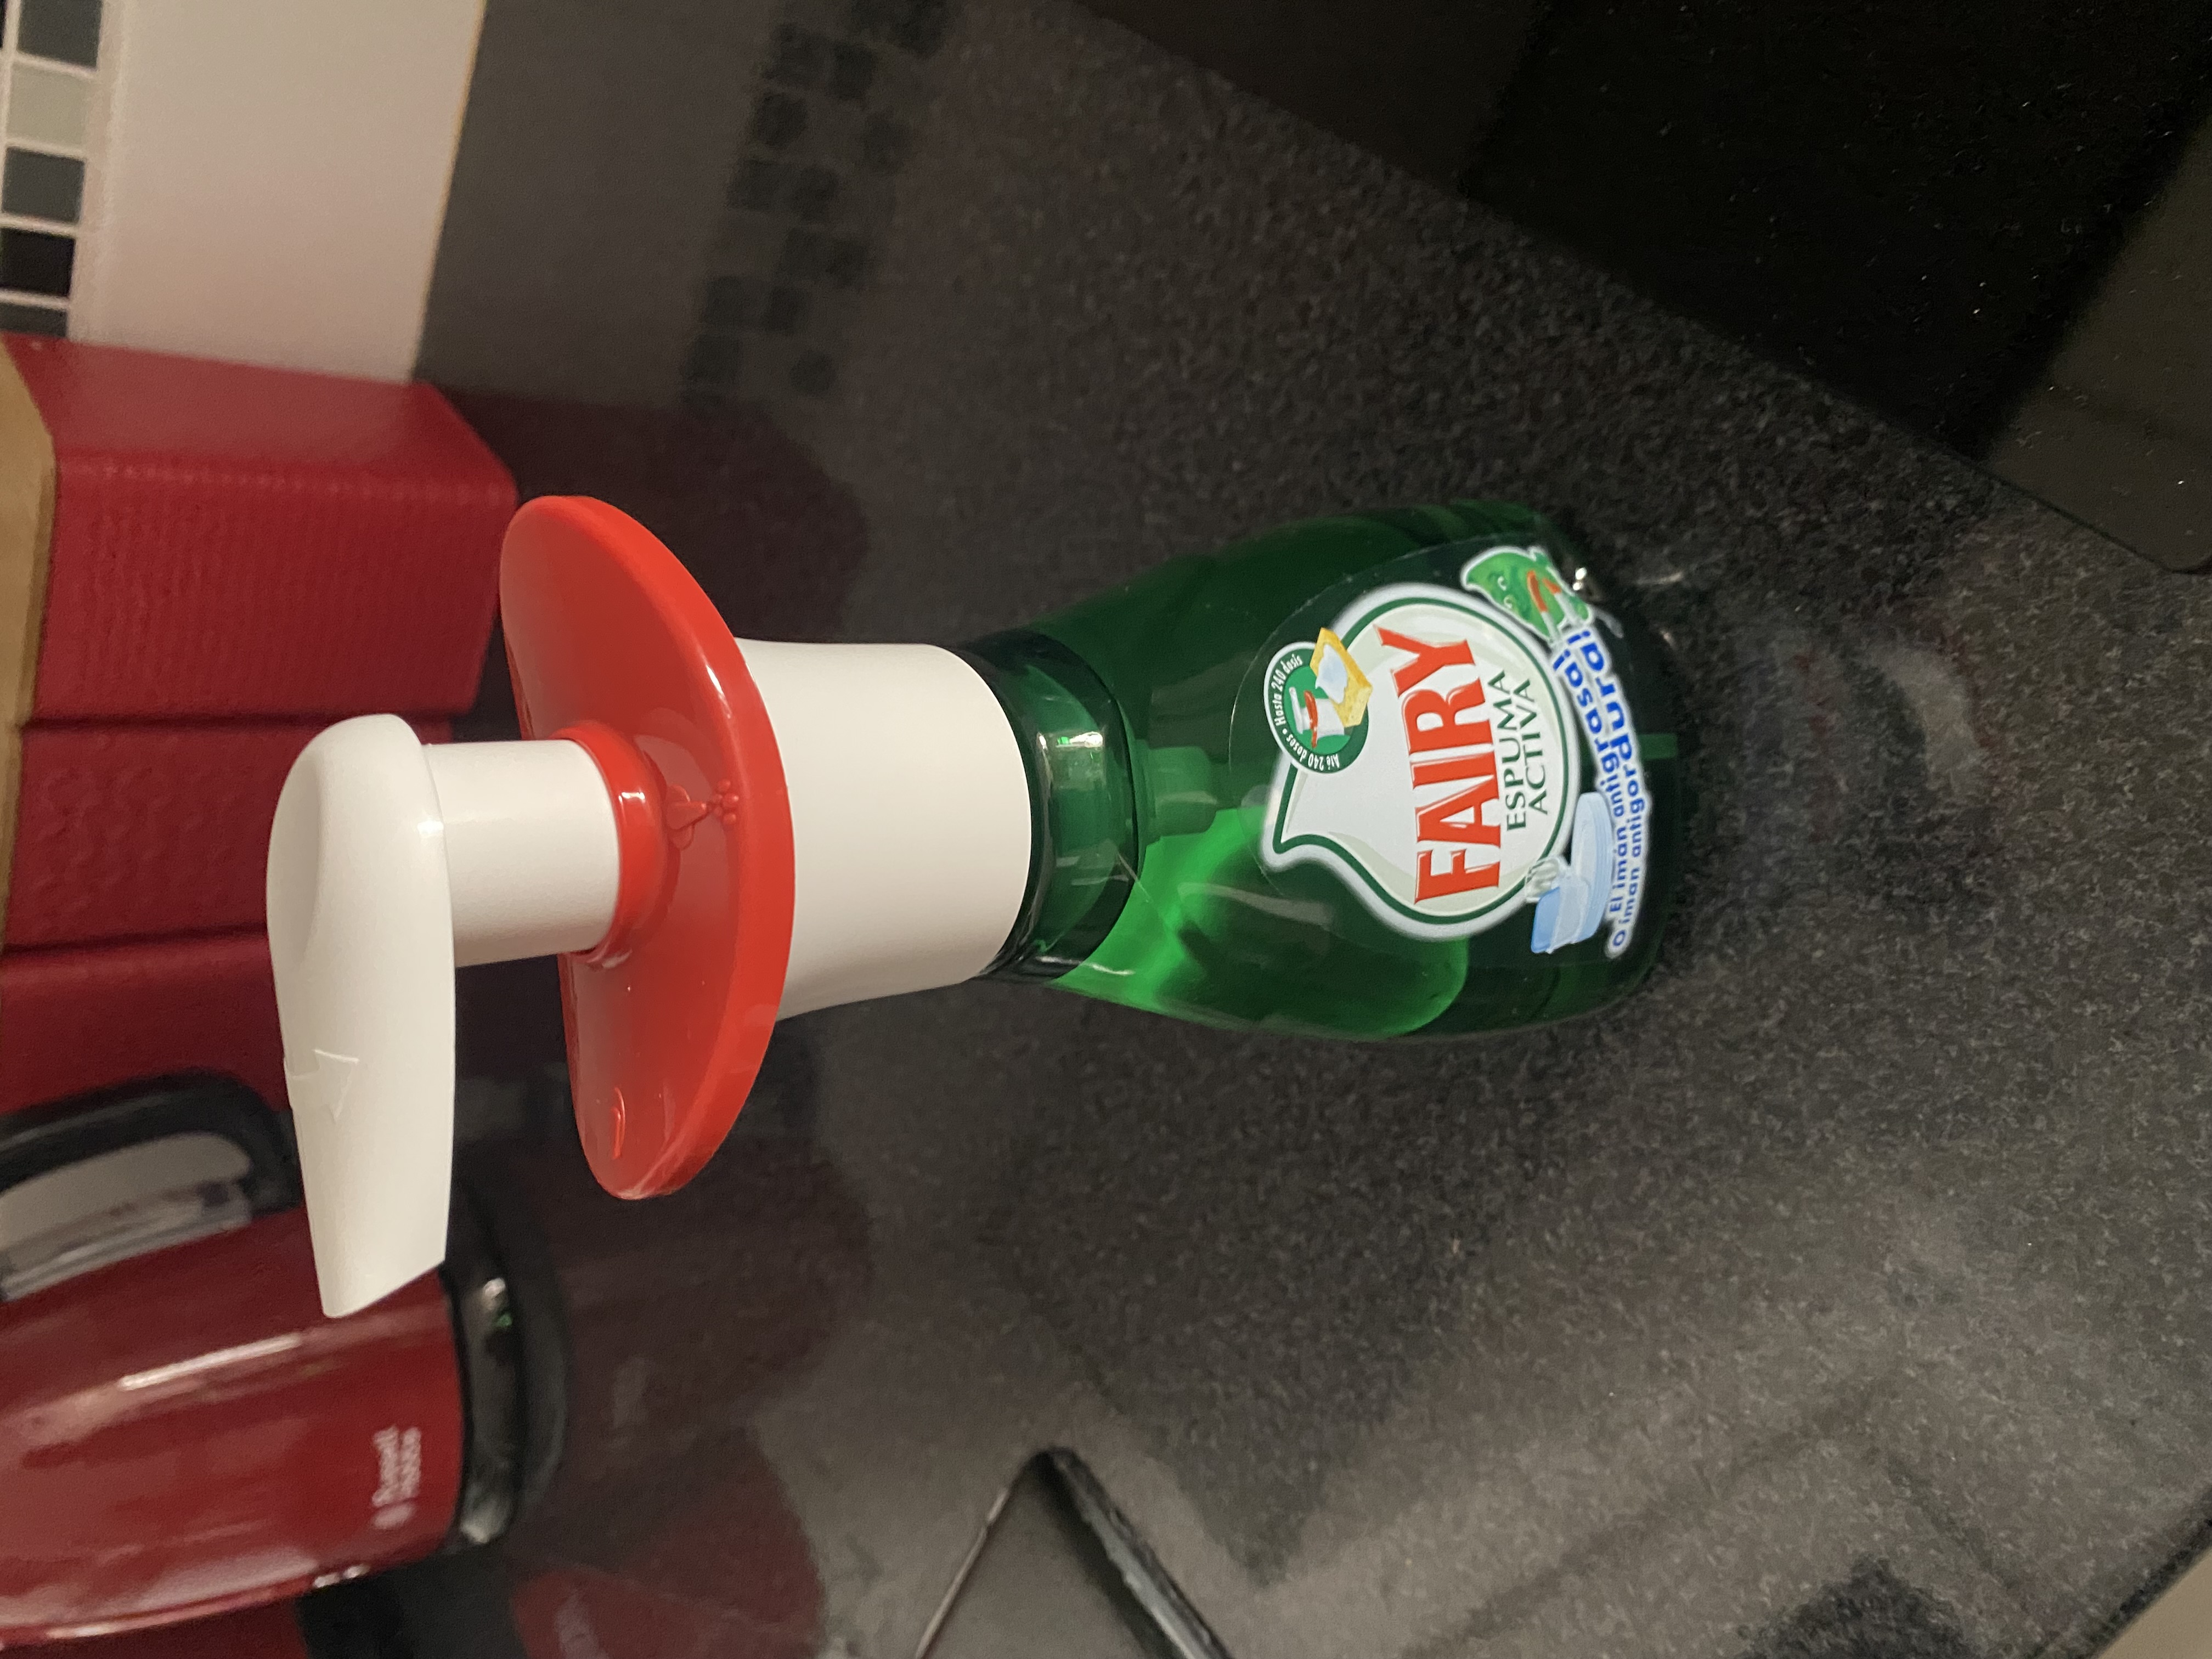 Fairy washing up liquid with pump dispenser - Where to buy things in  Algorfa - Algorfa forum - Costa Blanca forum in the Alicante province of  Spain